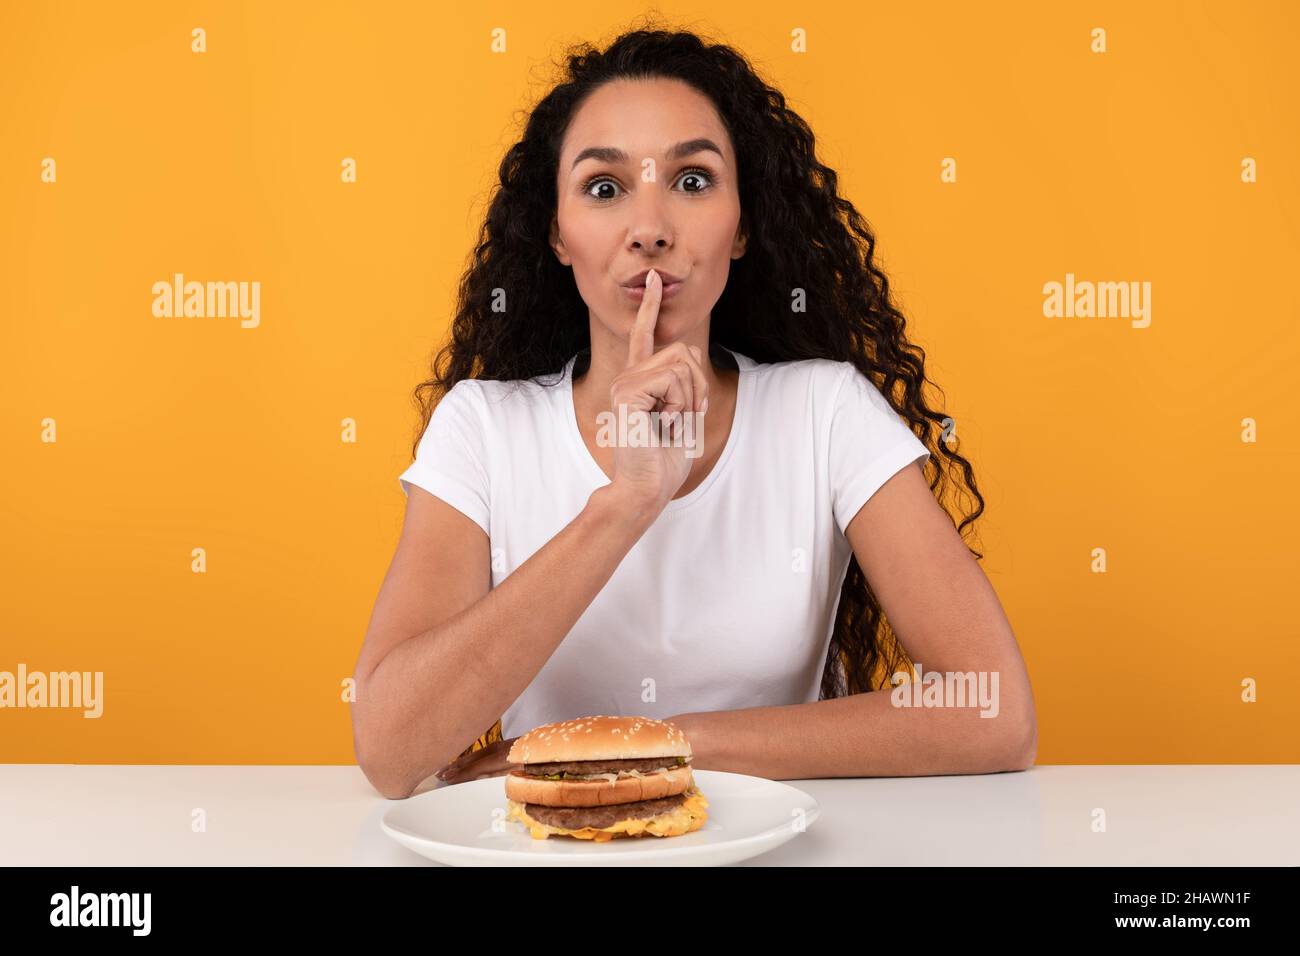 Hungry Lady Showing Silence Gesture Eating Burger Stock Photo